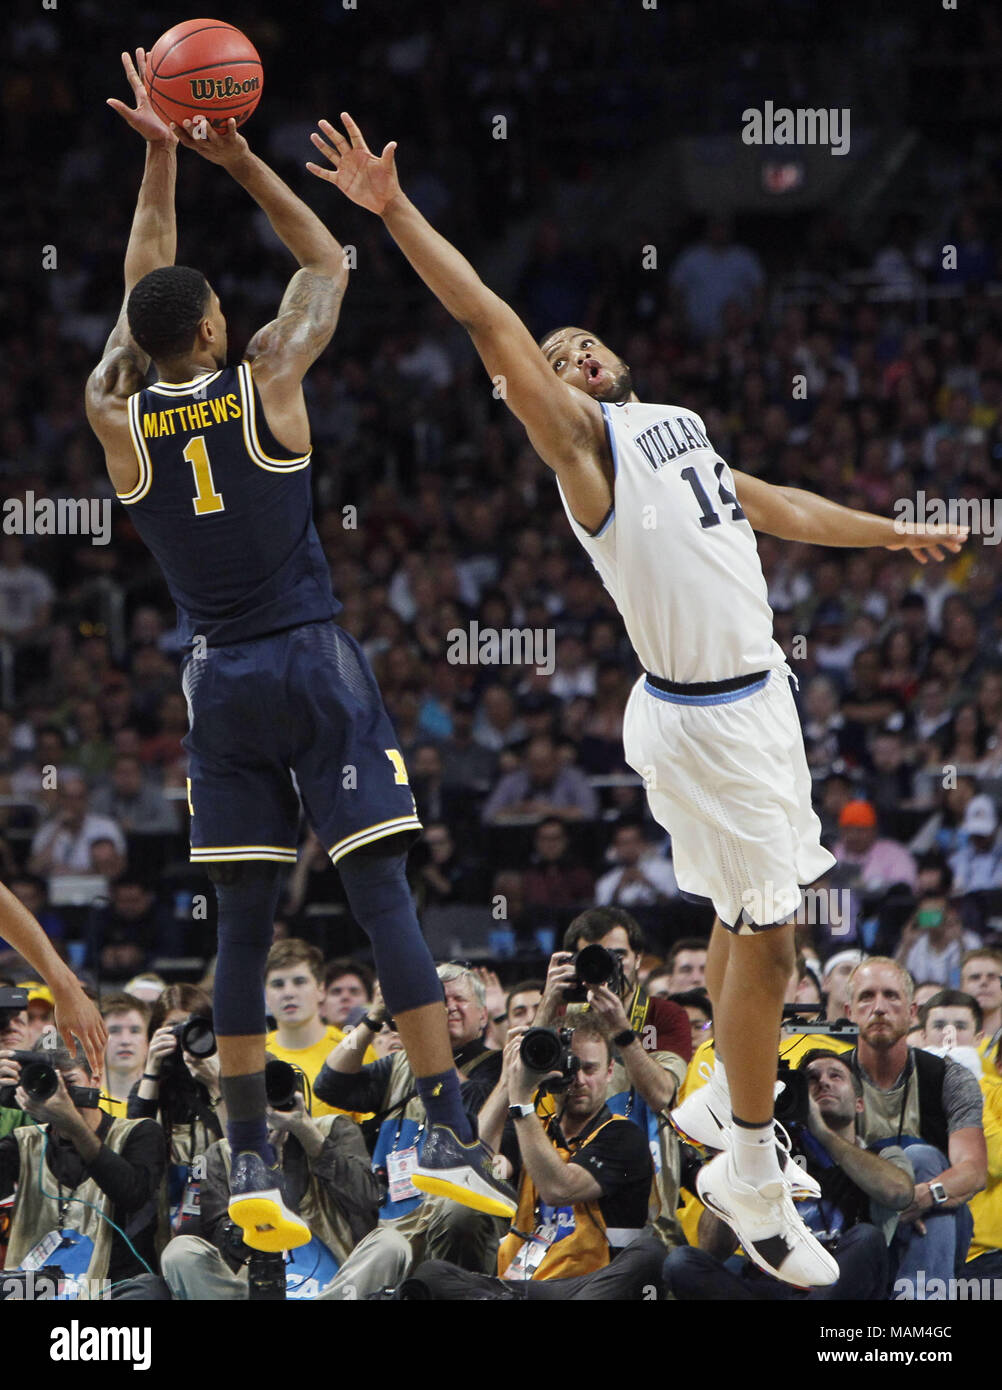 San Antonio, USA. 2nd Apr, 2018. Omari Spellman (R) of Villanova defends Charles Matthews of Michigan during the championship game of the Final Four NCAA college basketball tournament, in San Antonio, Texas, the United States, on April 2, 2018. Villanova claimed the title by defeating Michigan with 79-62. Credit: Song Qiong/Xinhua/Alamy Live News Stock Photo